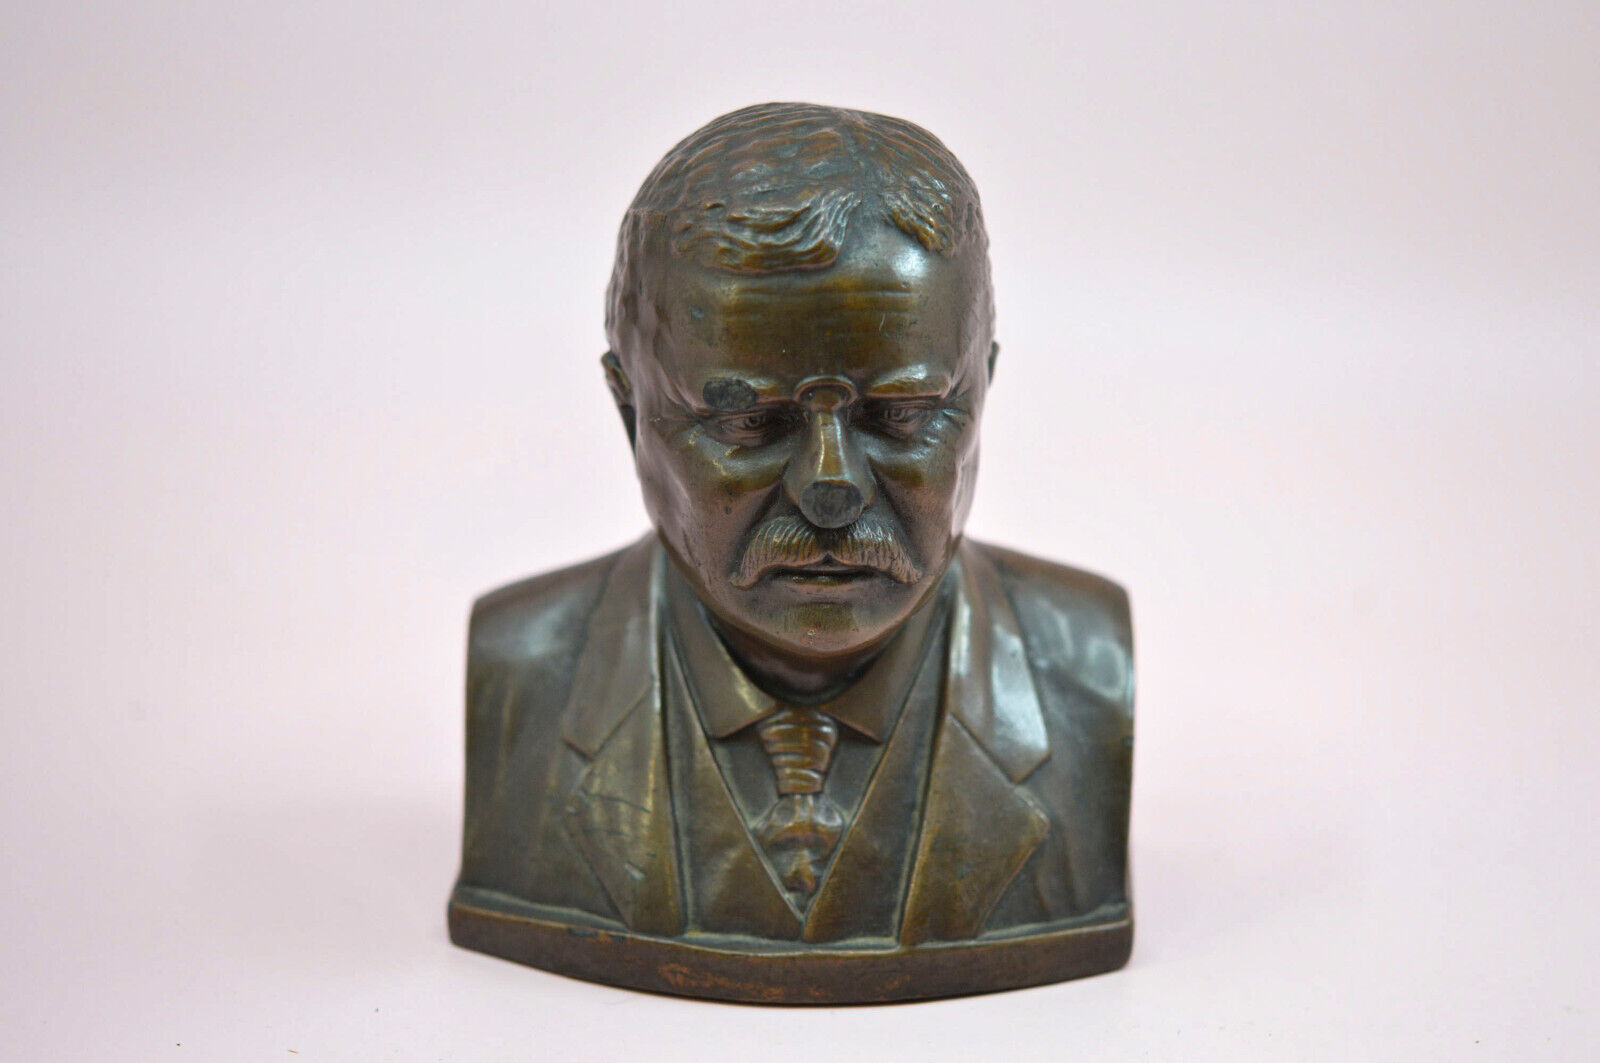 President Theodore Roosevelt , JB 1793 Bust, 4.5 inches tall